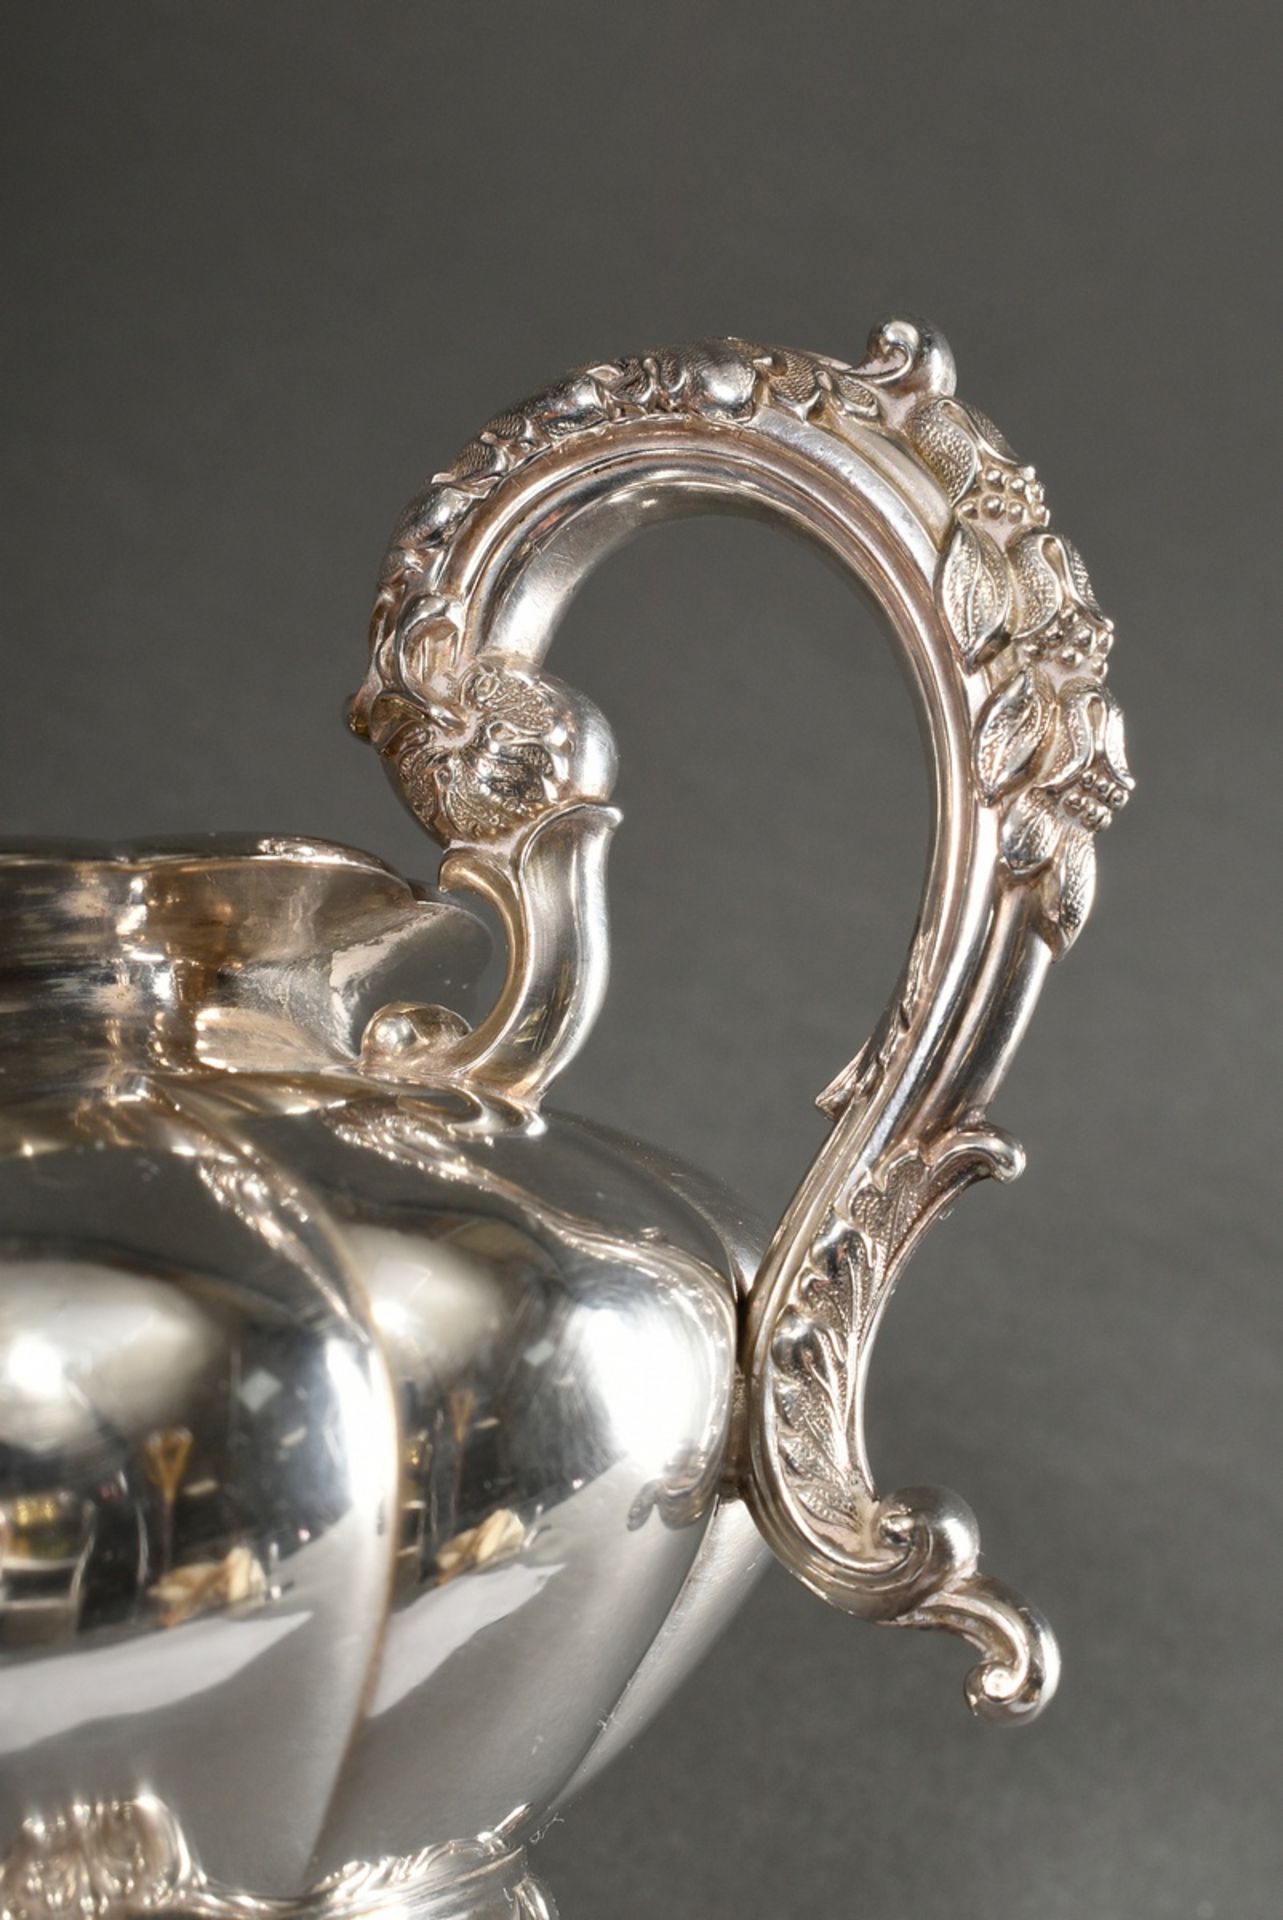 Cambered milk pourer with floral relief rim and feet, engraved family crest "Hand with closed crown - Image 5 of 7